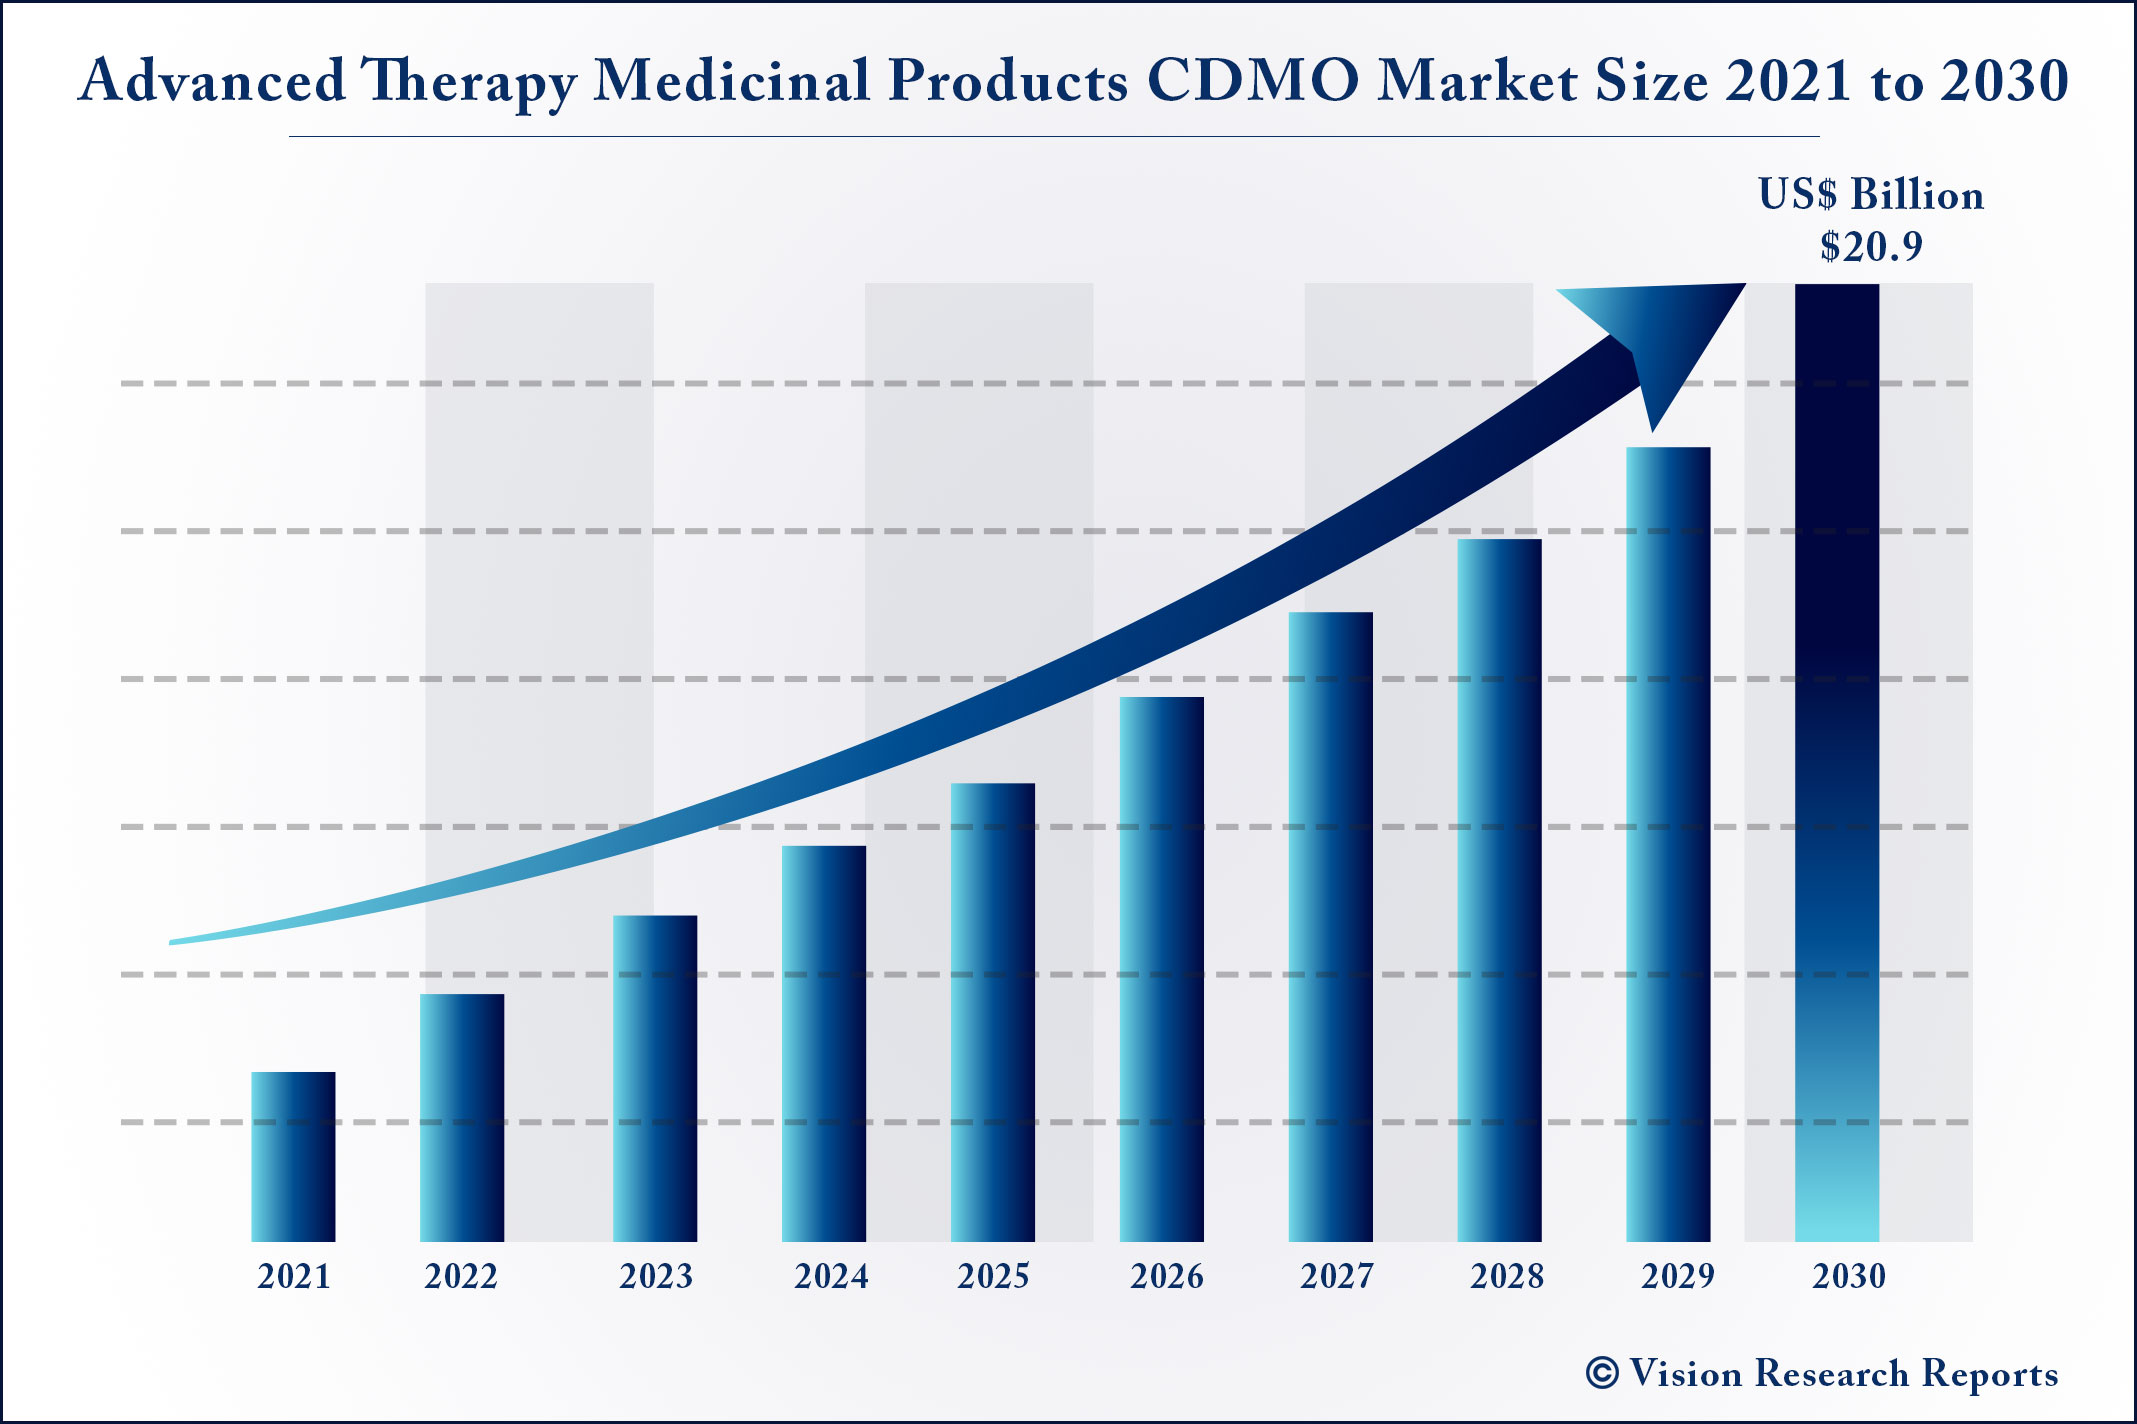 Advanced Therapy Medicinal Products CDMO Market Size 2021 to 2030